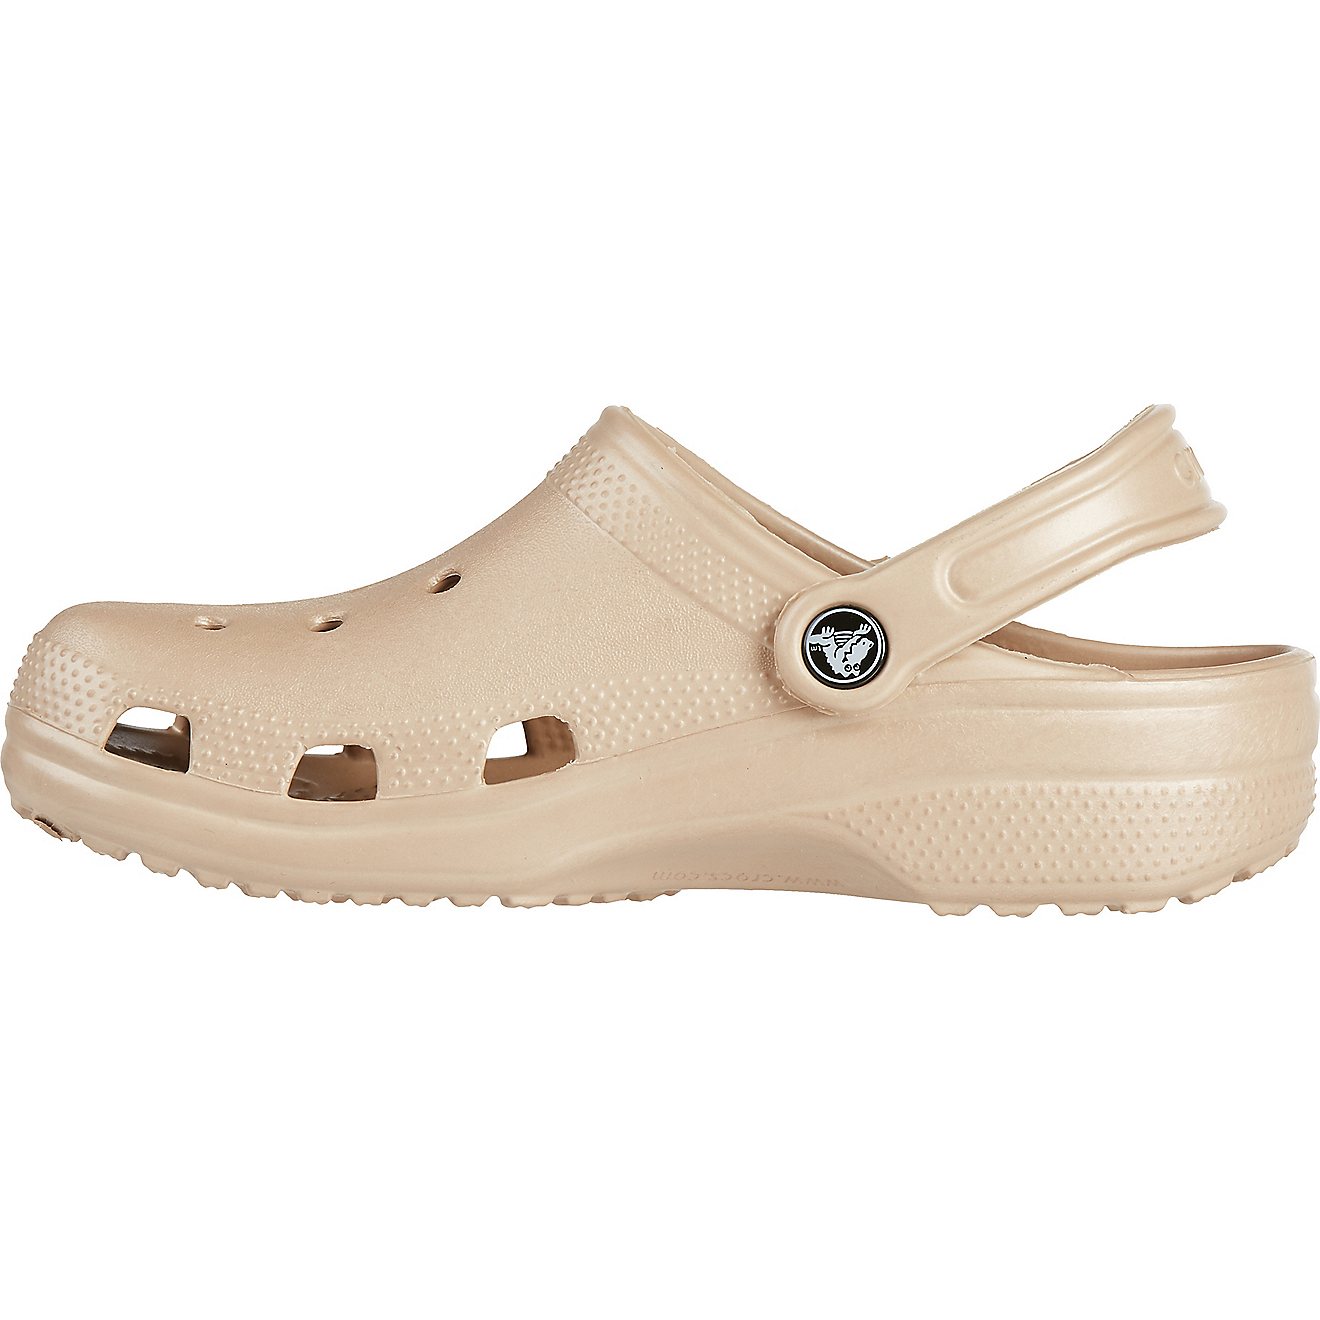 Crocs™ Adults' Classic Clogs                                                                                                   - view number 2